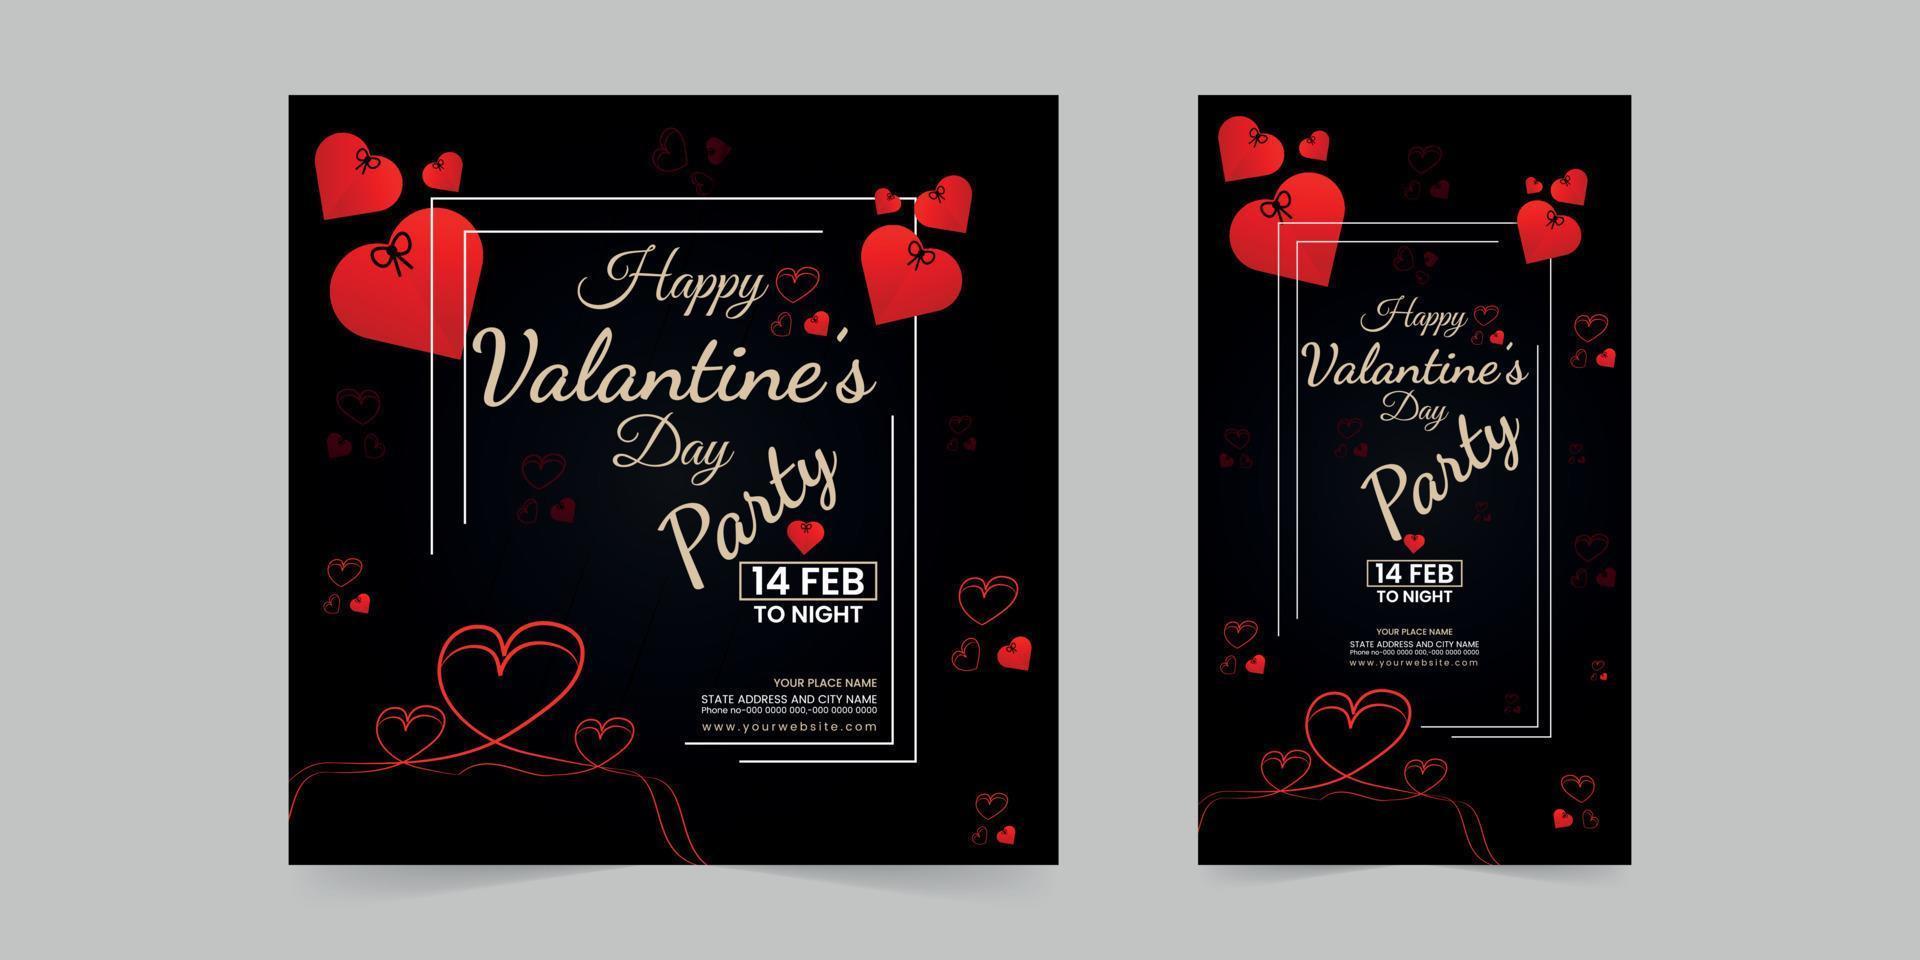 Editable Valentine's Day party Instagram Stories template with a heart shape background banner design set Suitable for social media post. vector